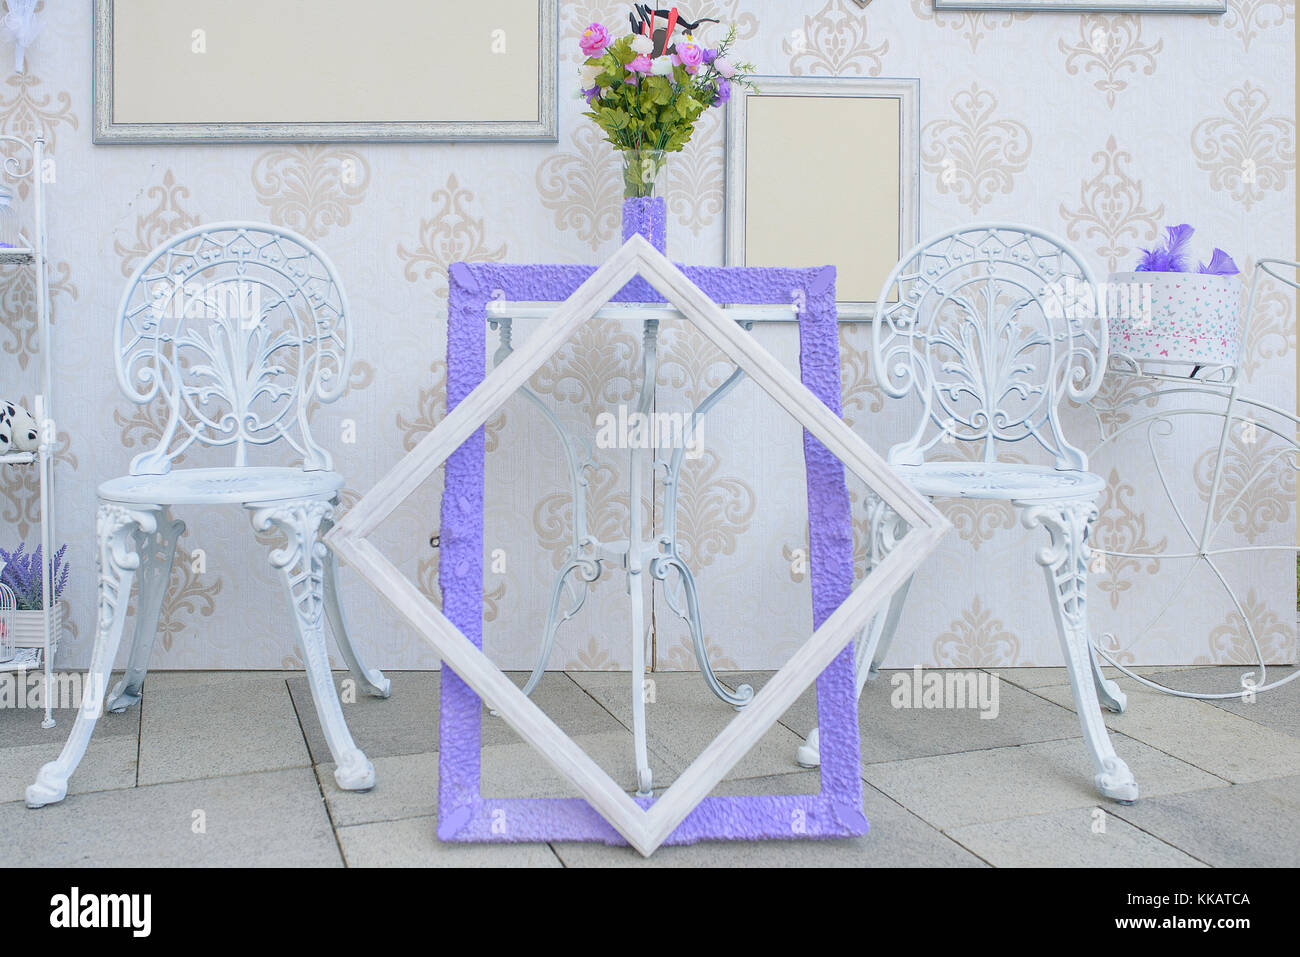 Outdoor white iron furniture and empty picture frames with purple accents, interesting minimalist display for wedding receptions or garden parties Stock Photo